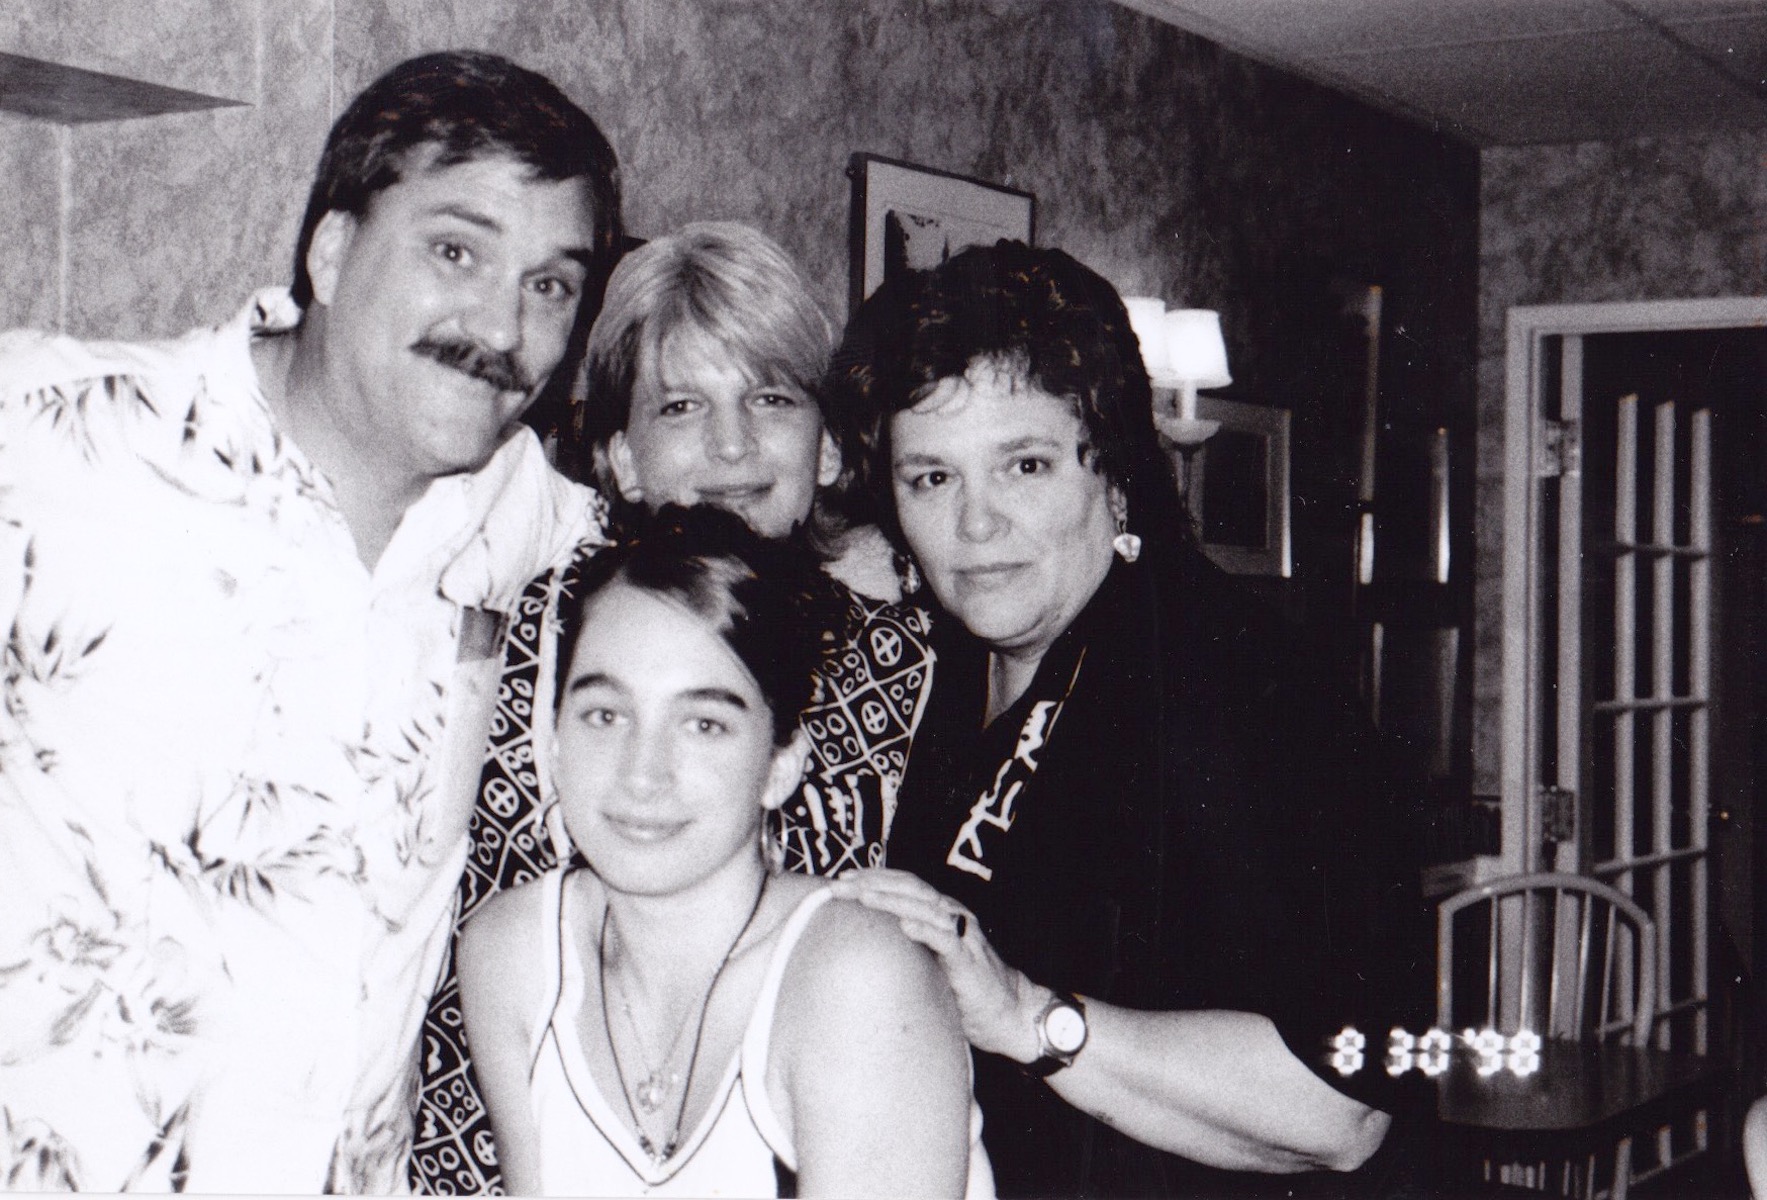 Donna Red Wing, her twin brother David, her stepsister Judy, and her niece.